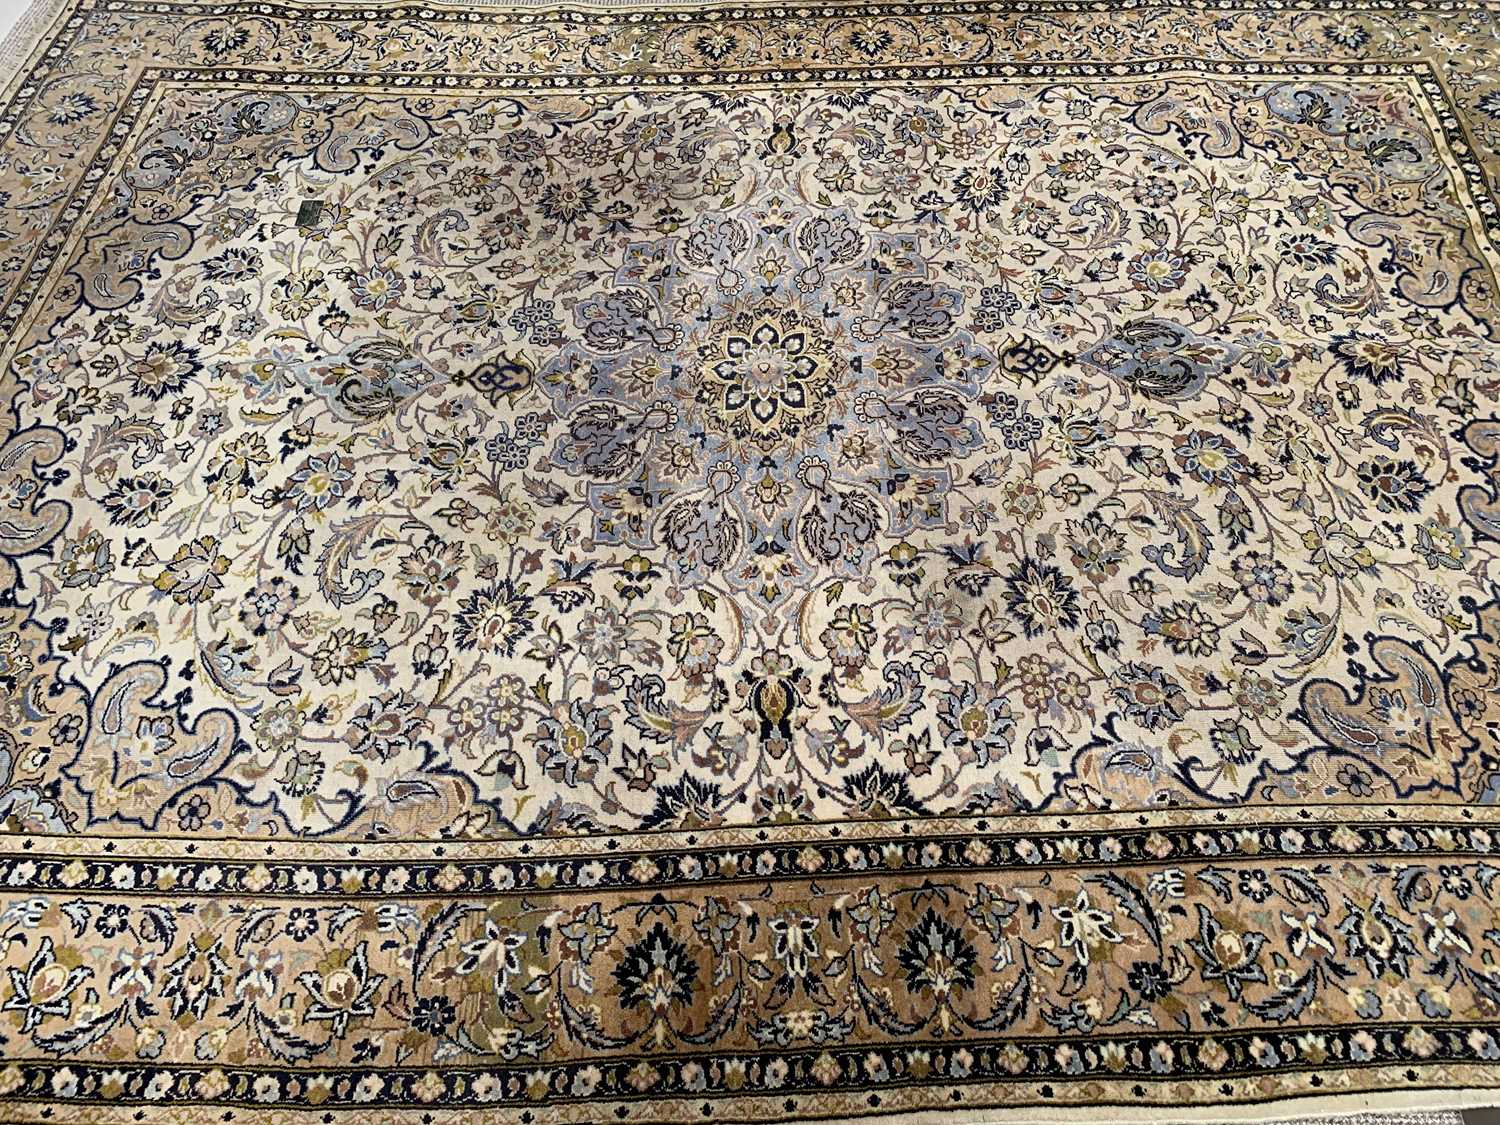 LARGE EASTERN STYLE RUG - multiple bordered with tasselled ends, mainly beige and blue ground with - Image 3 of 3